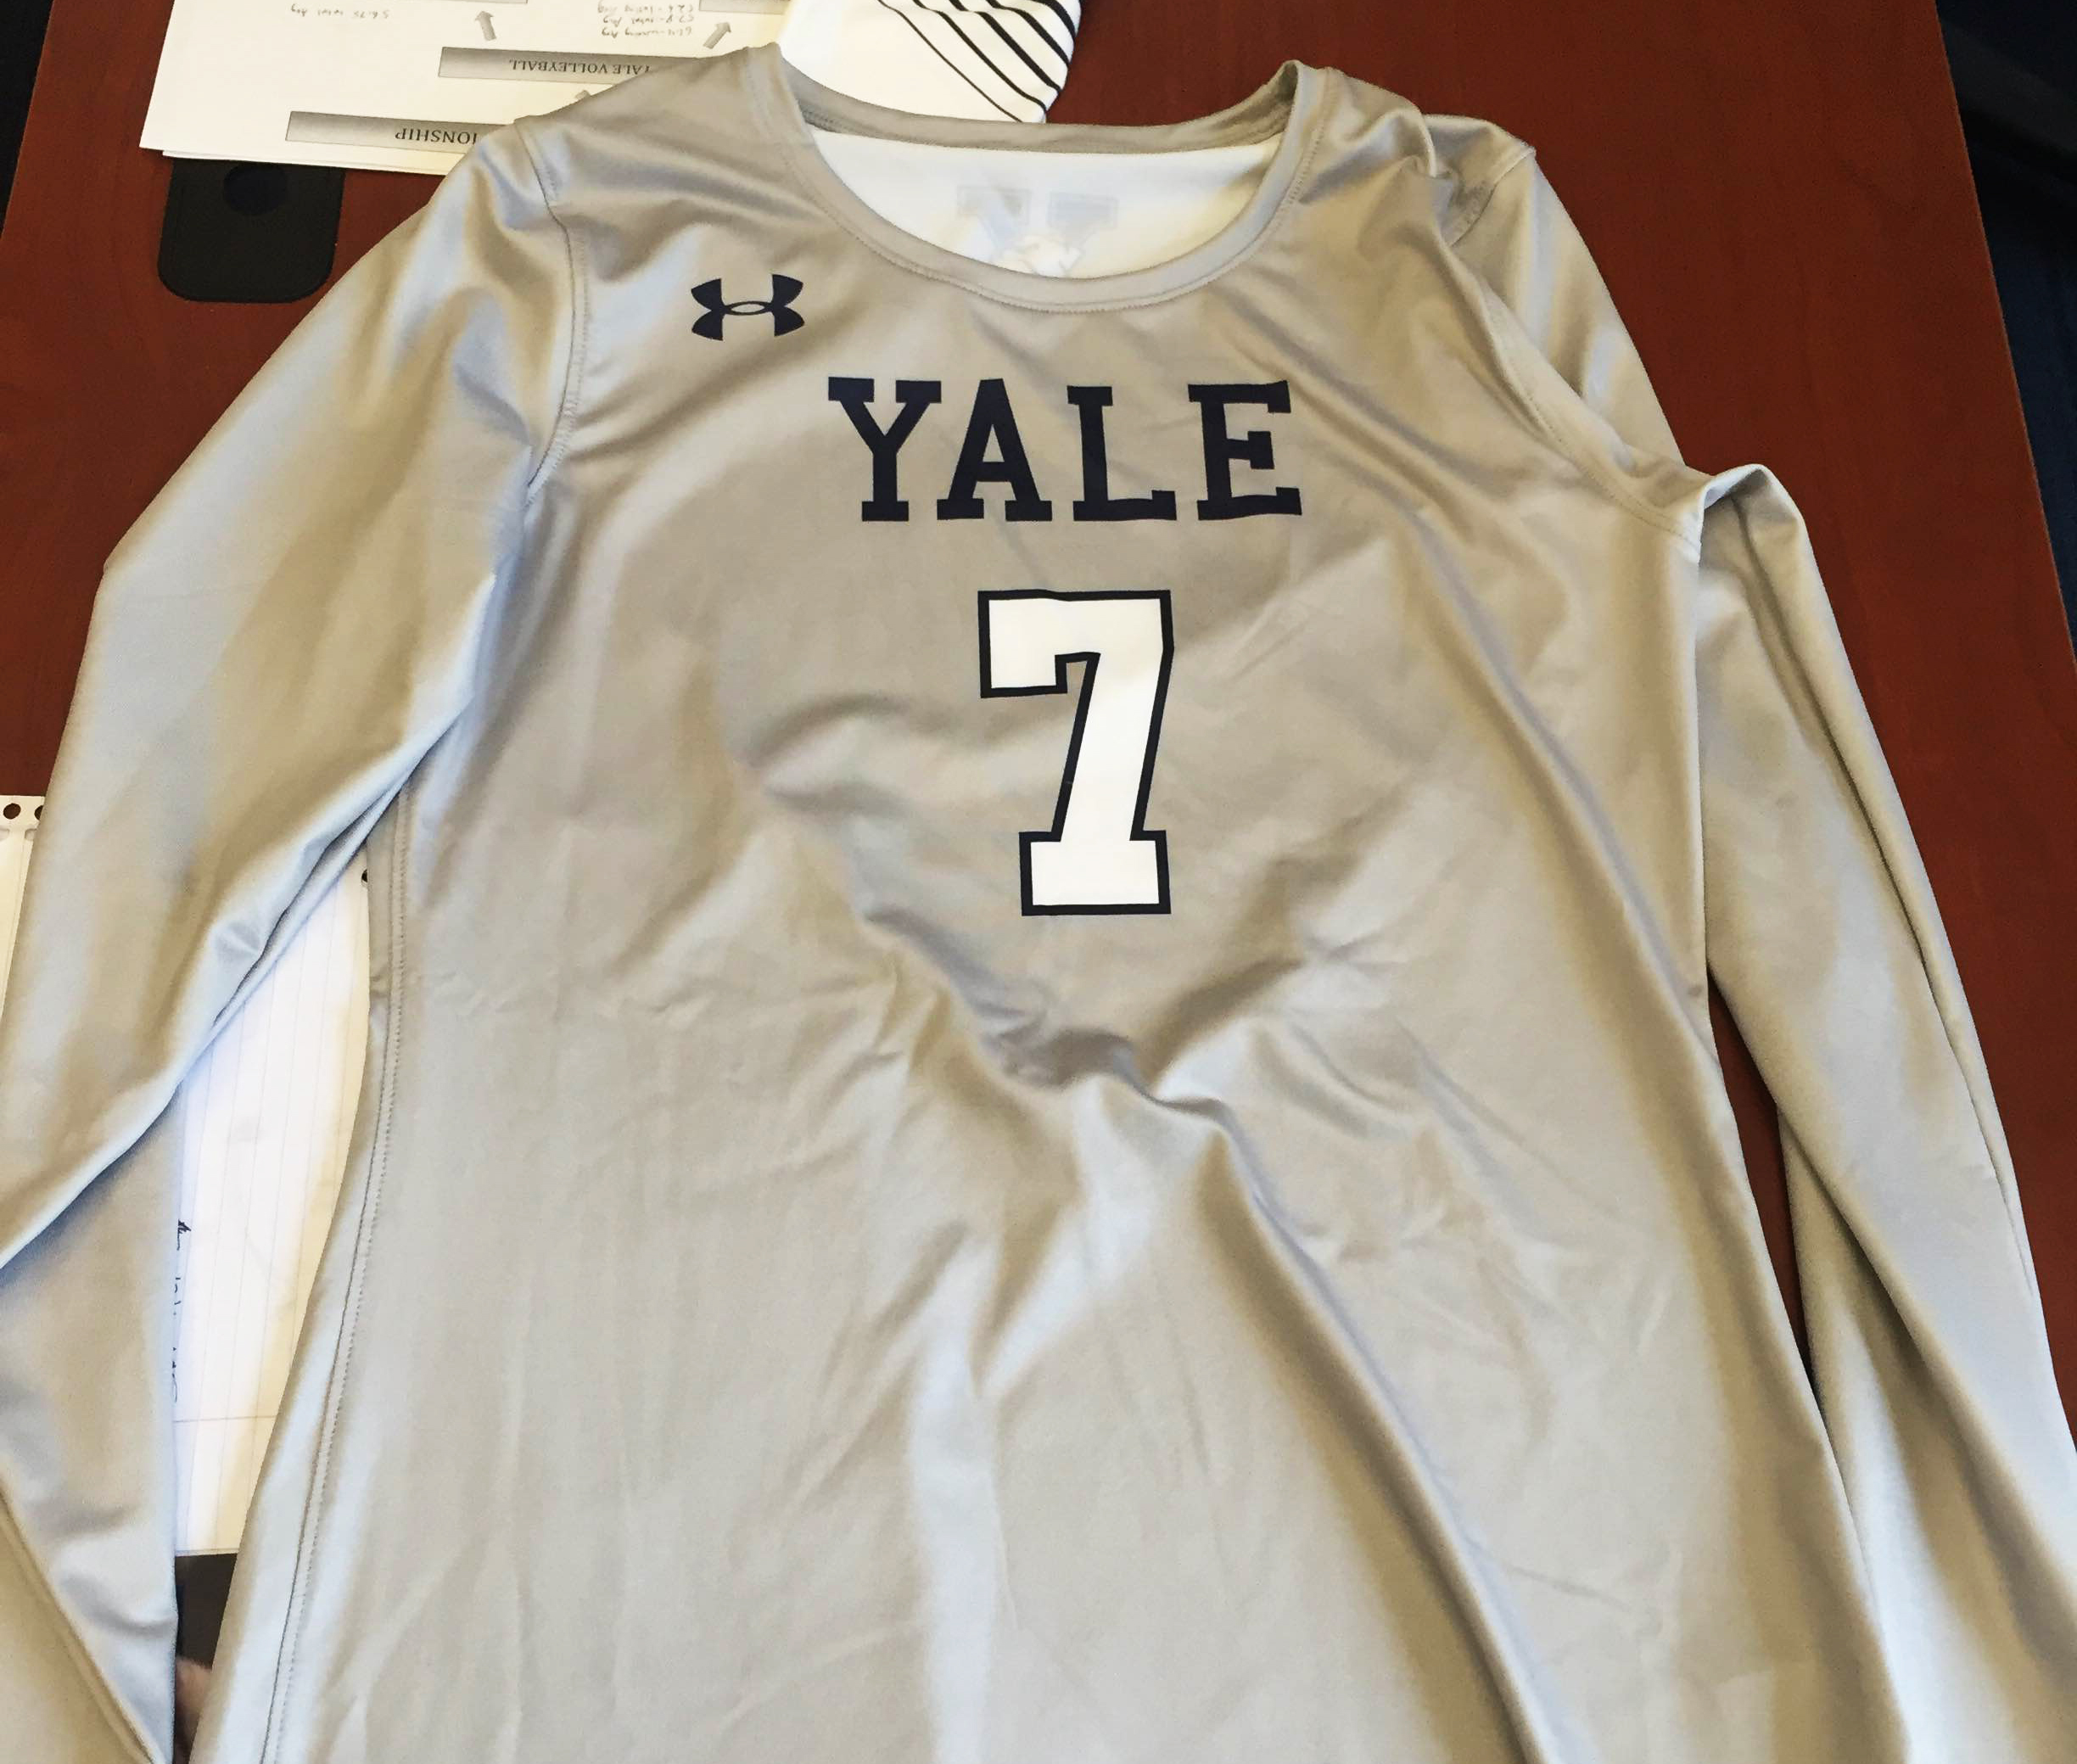 Yale athletes take to field in new Under Armour uniforms - Yale Daily News